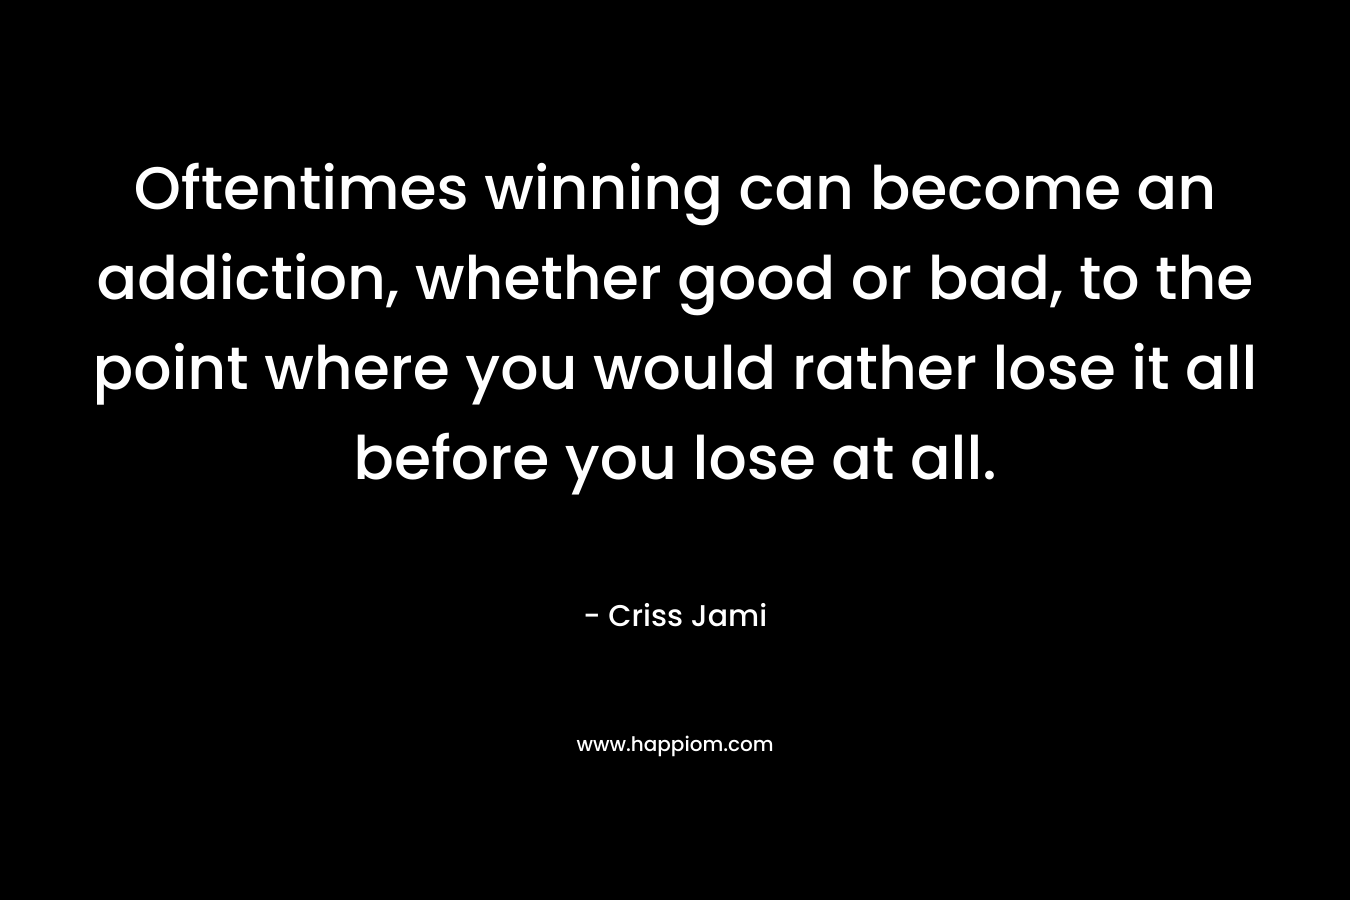 Oftentimes winning can become an addiction, whether good or bad, to the point where you would rather lose it all before you lose at all.